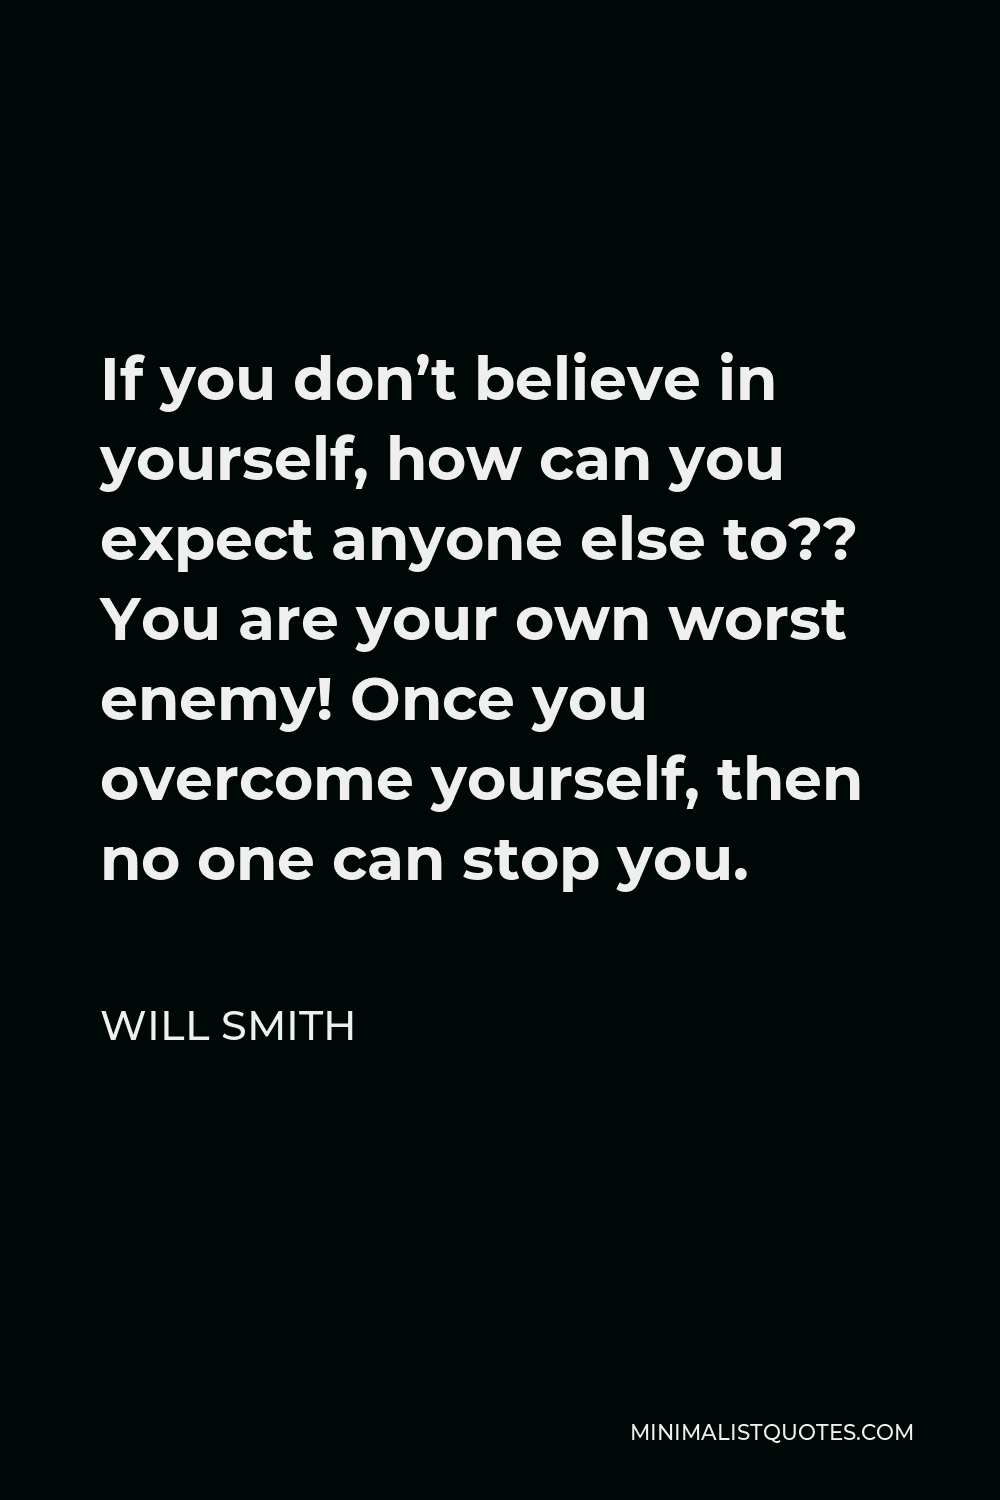 Will Smith Quote If You Don T Believe In Yourself How Can You Expect Anyone Else To You Are Your Own Worst Enemy Once You Overcome Yourself Then No One Can Stop You